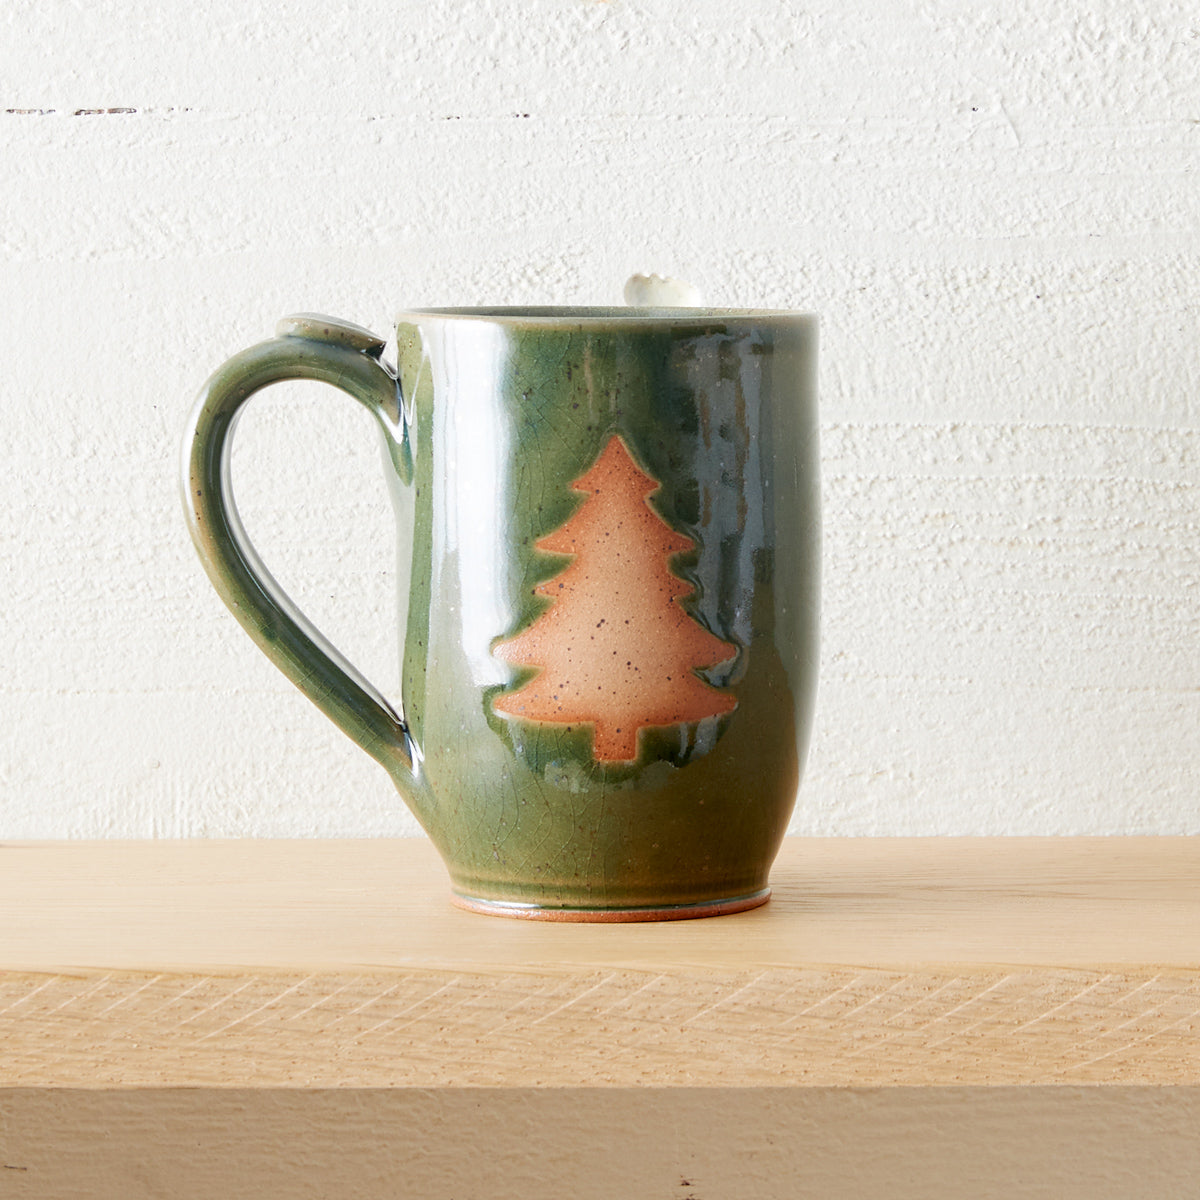 https://cdn.shopify.com/s/files/1/0246/7912/0989/products/potterychristmastreemugs1.jpg?v=1672849168